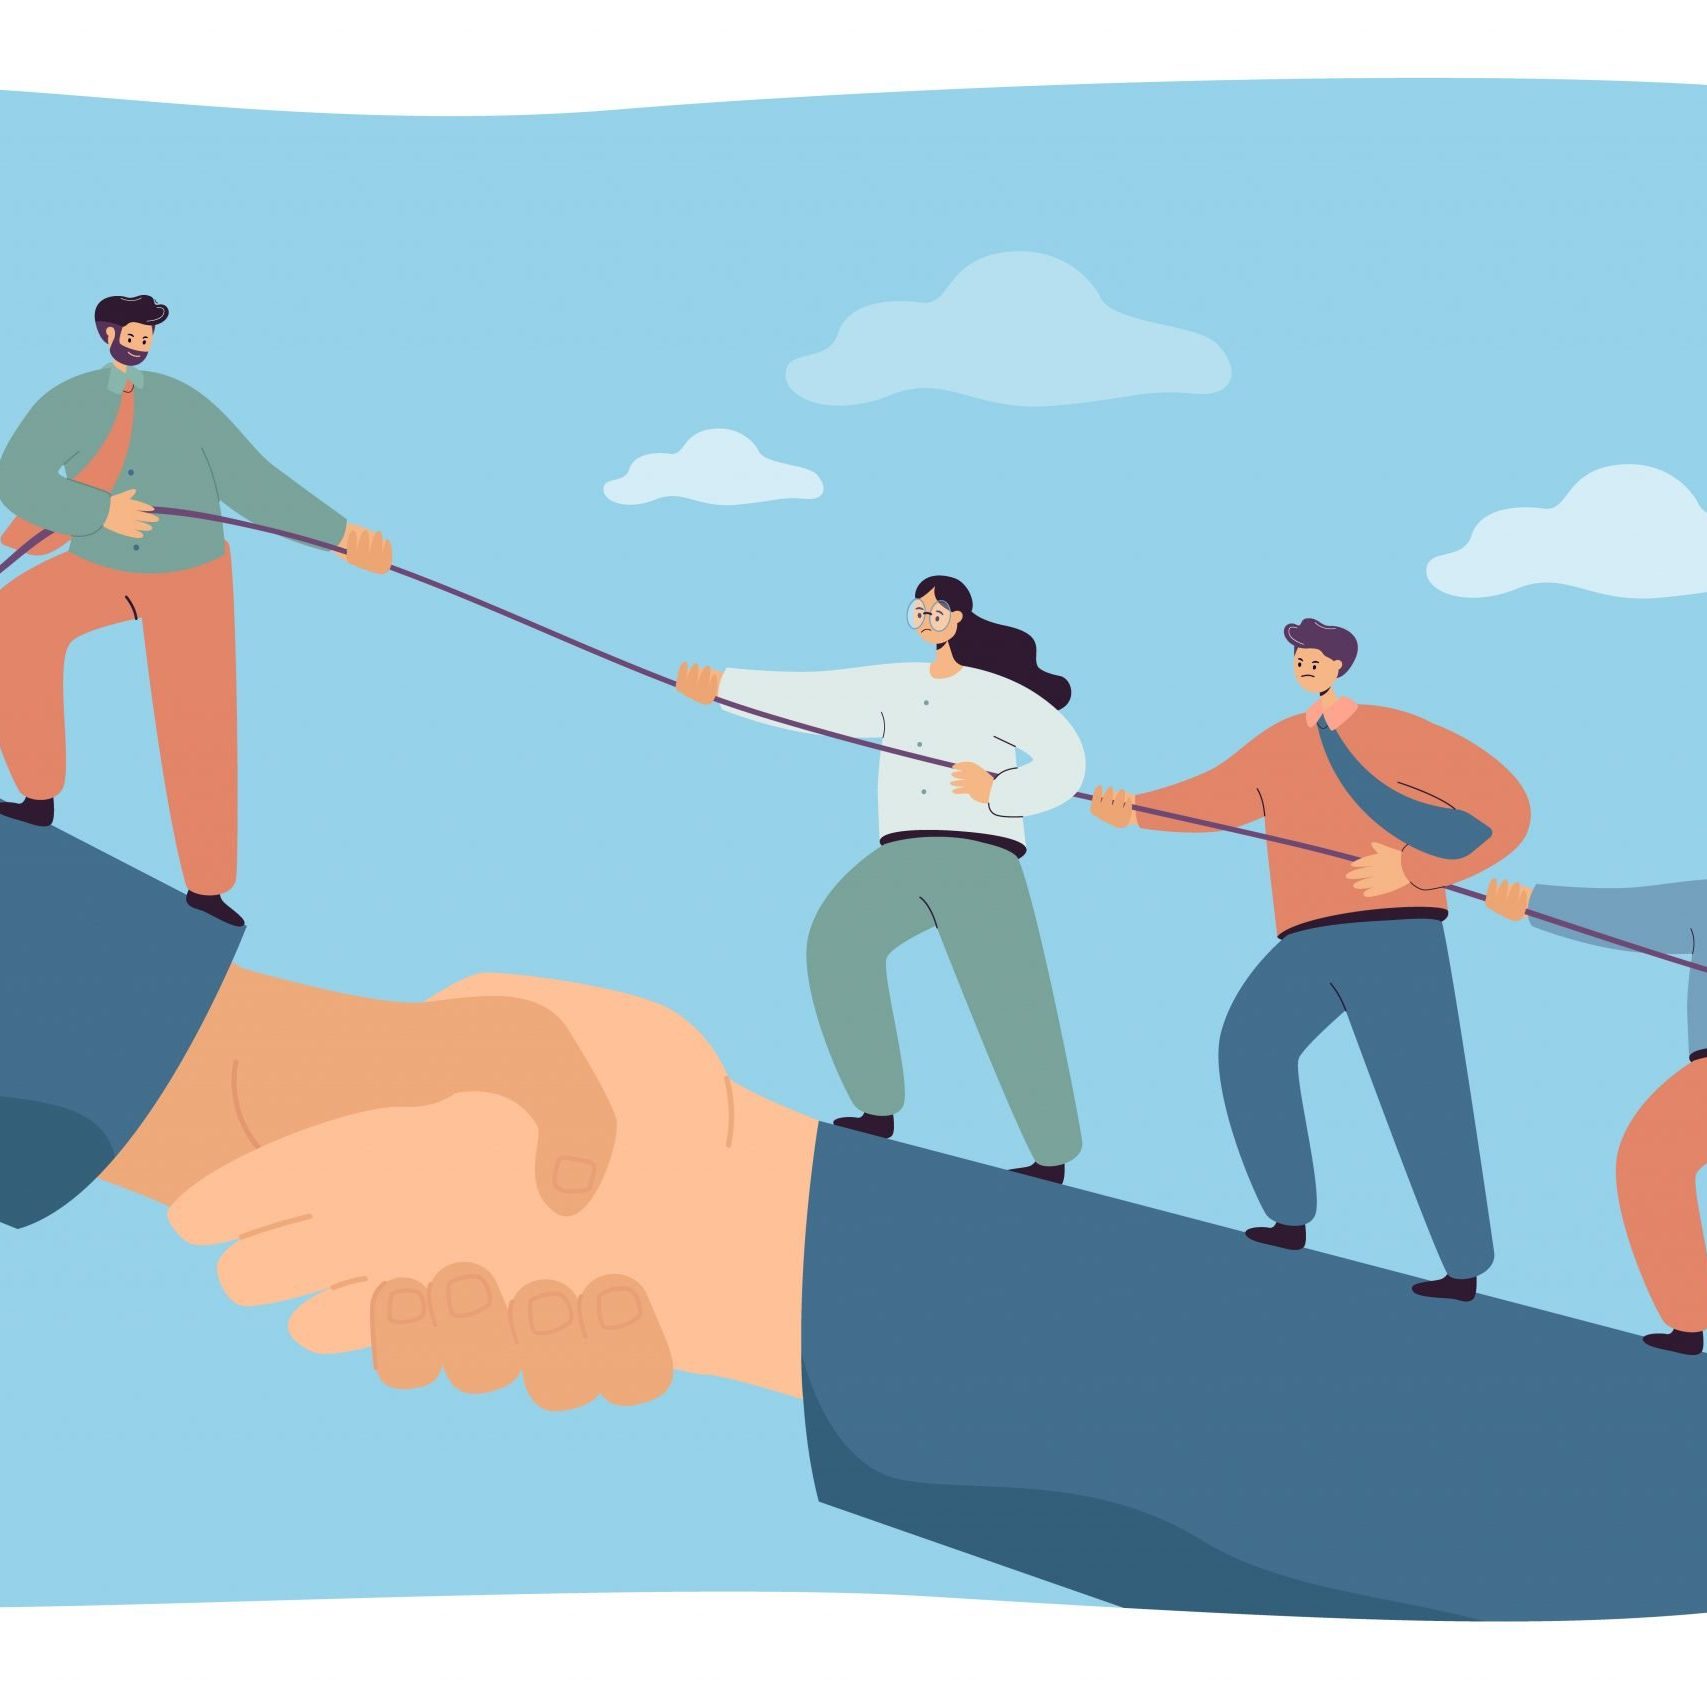 Business team climbing giant handshake with support of leader. Flat vector illustration. Cooperation of employees striving for success and career achievements. Leadership, teamwork, growth concept